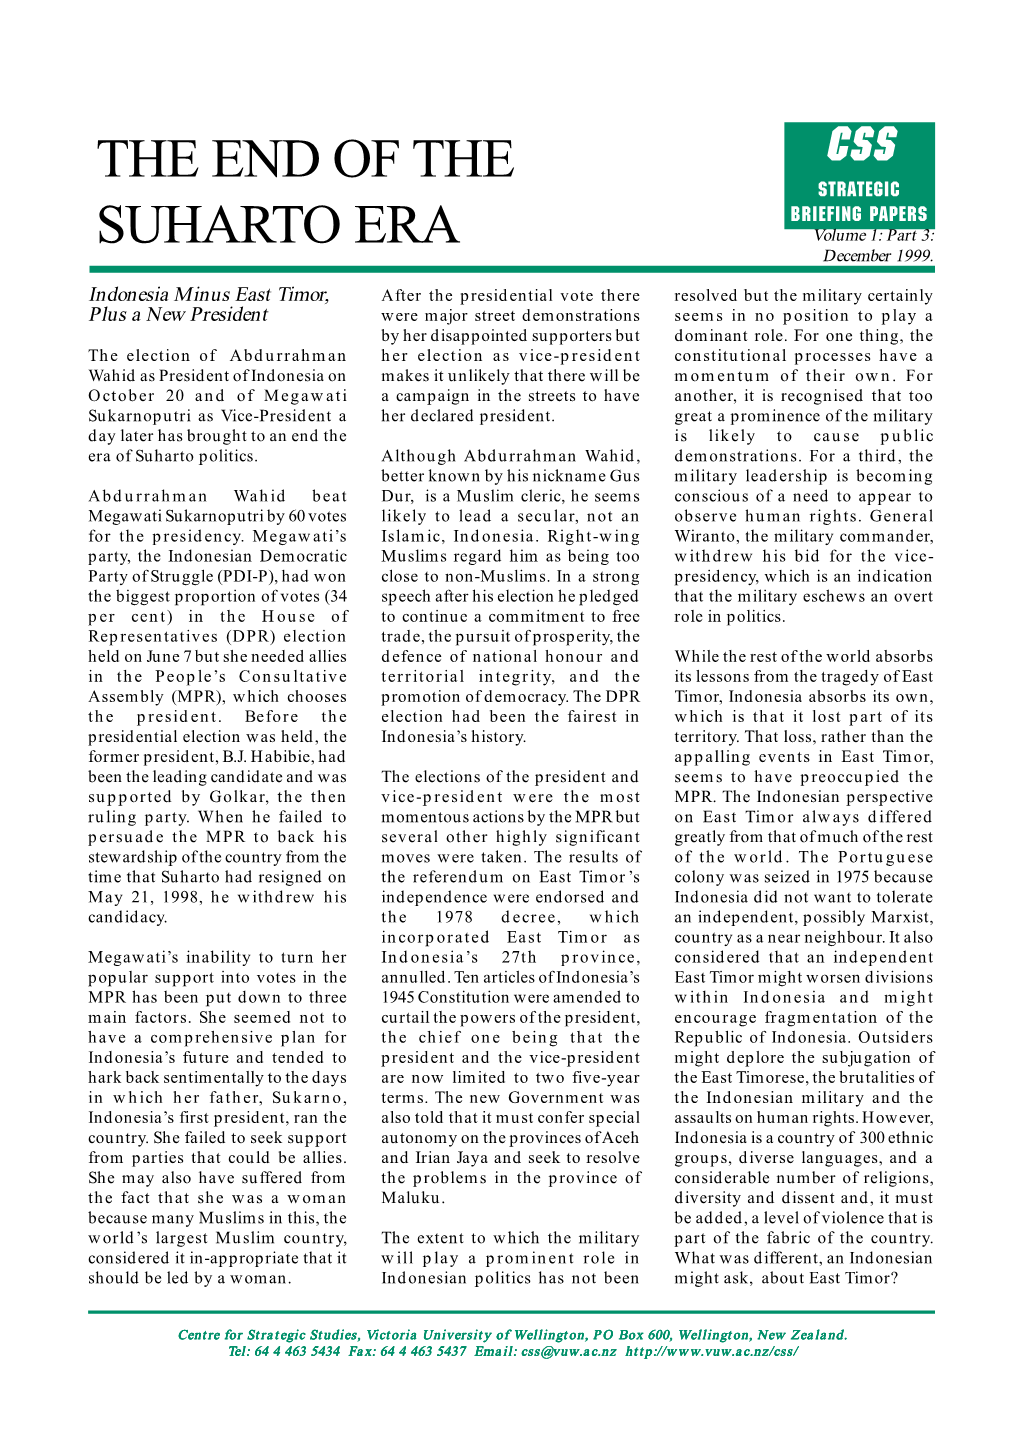 The End of the Suharto